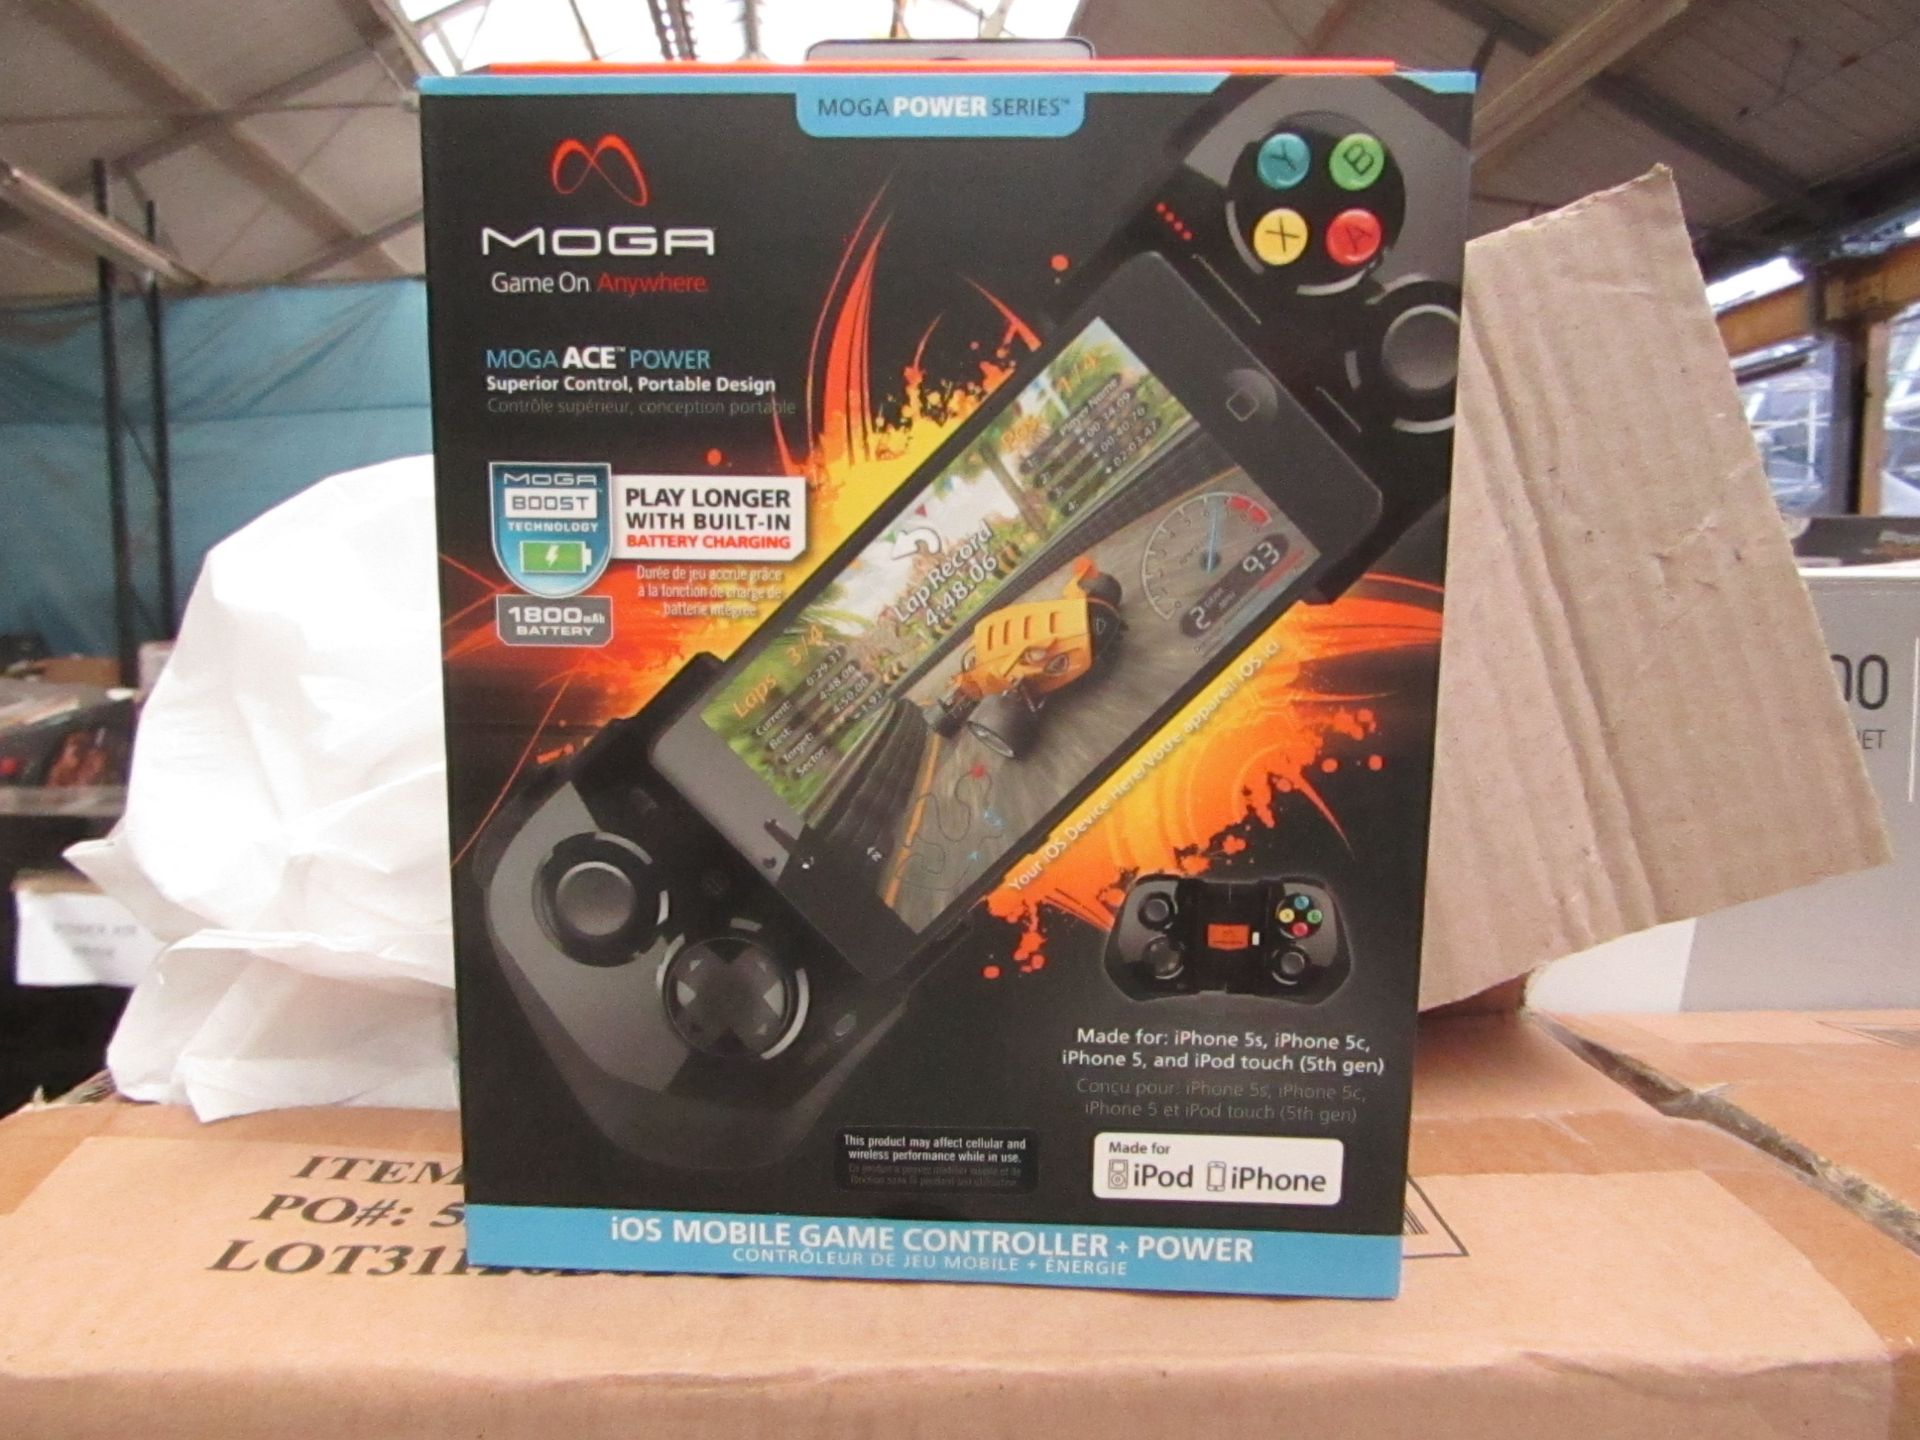 Moga iPhone mobile gaming controller attaachment that also charges the phones, it turns the phone